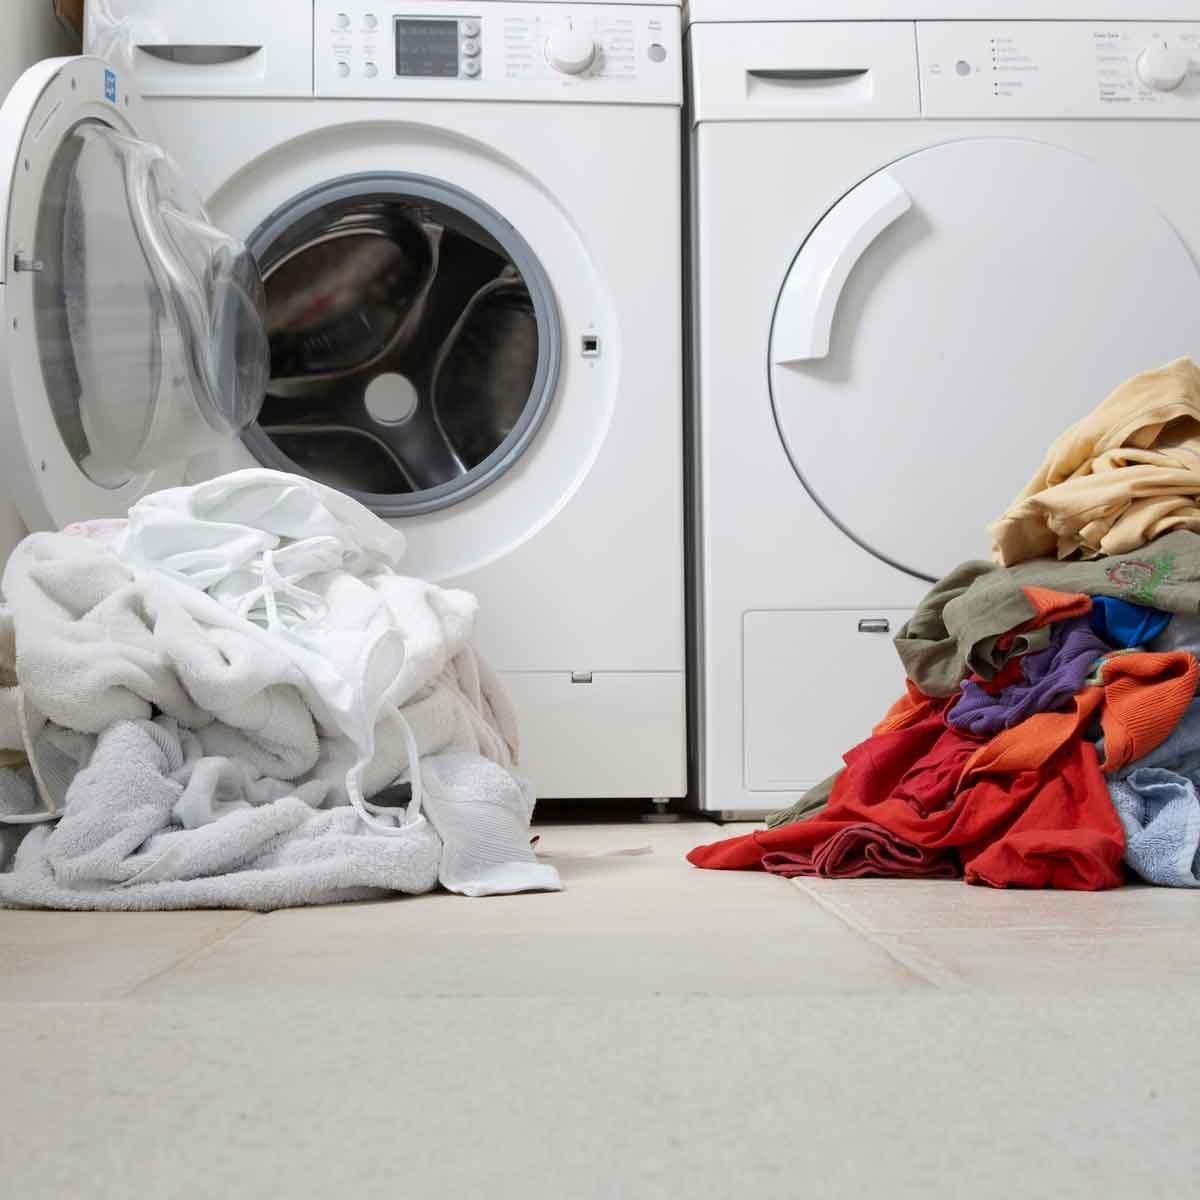 How to Sort Your Laundry in 3 Easy Steps